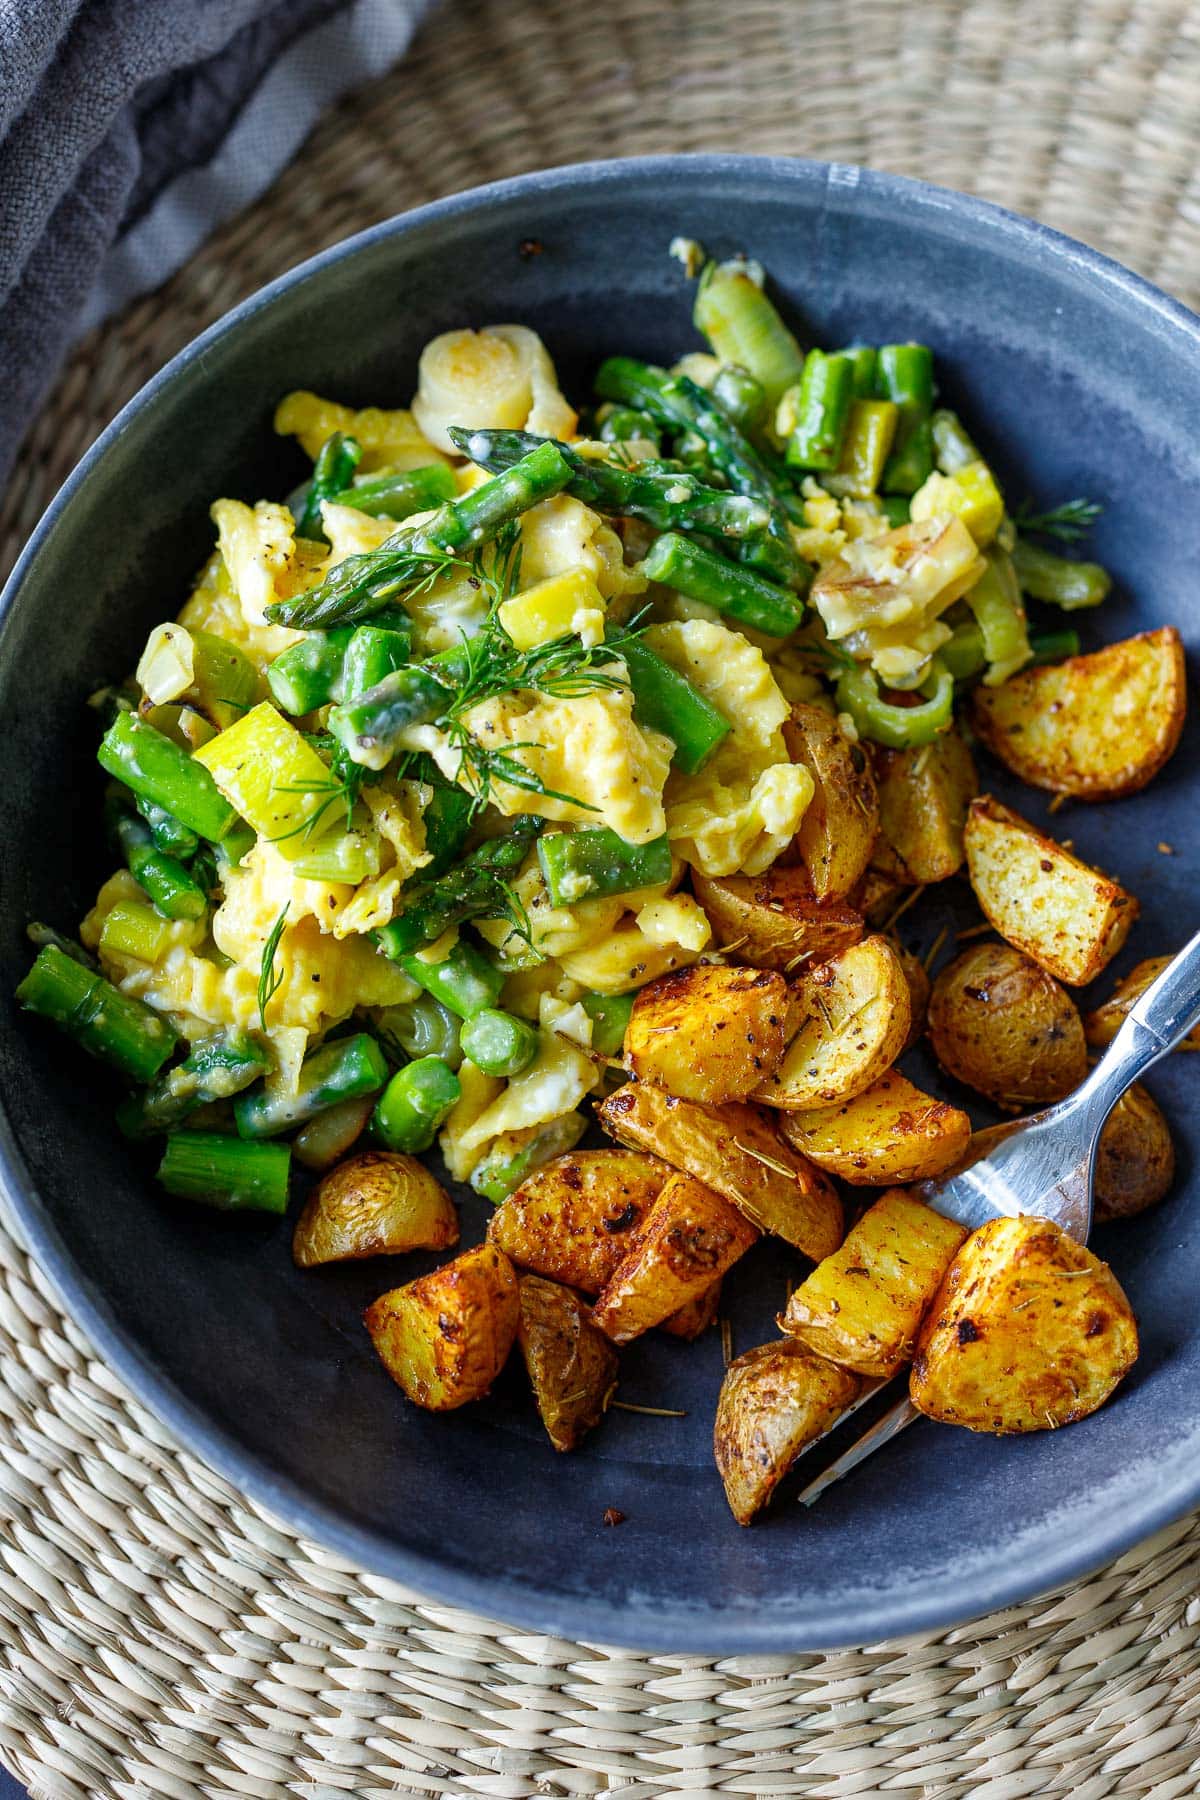 This recipe for Scrambled Eggs is made with tender asparagus, melted leeks, chèvre, and fresh dill - is a simple, easy breakfast inspired by spring!